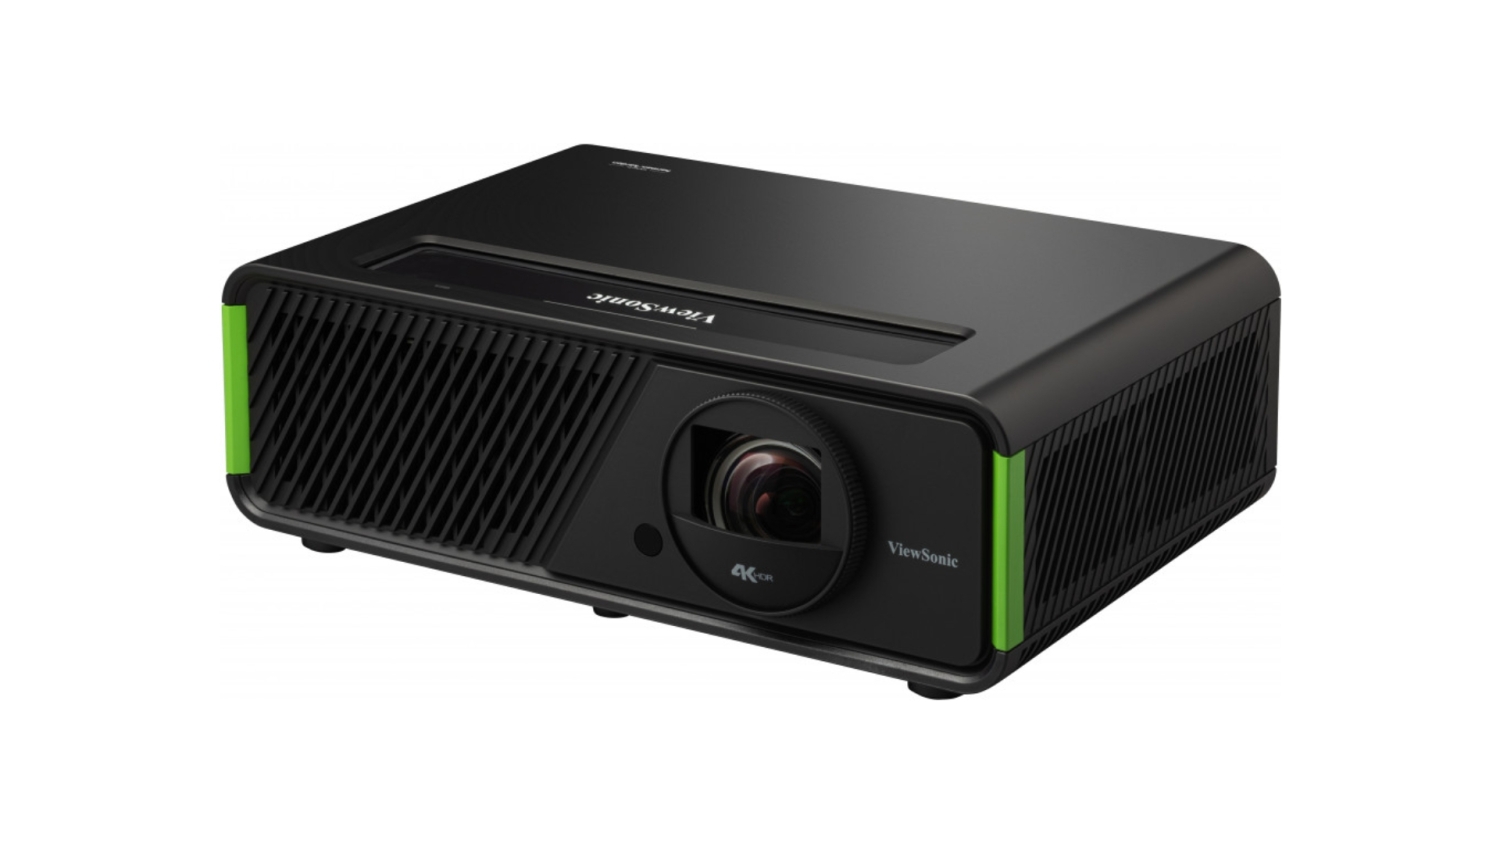 TweakTown Enlarged Image - The new ViewSonic X2-4K projector is designed for Xbox Series X|S and gaming, image credit: ViewSonic.